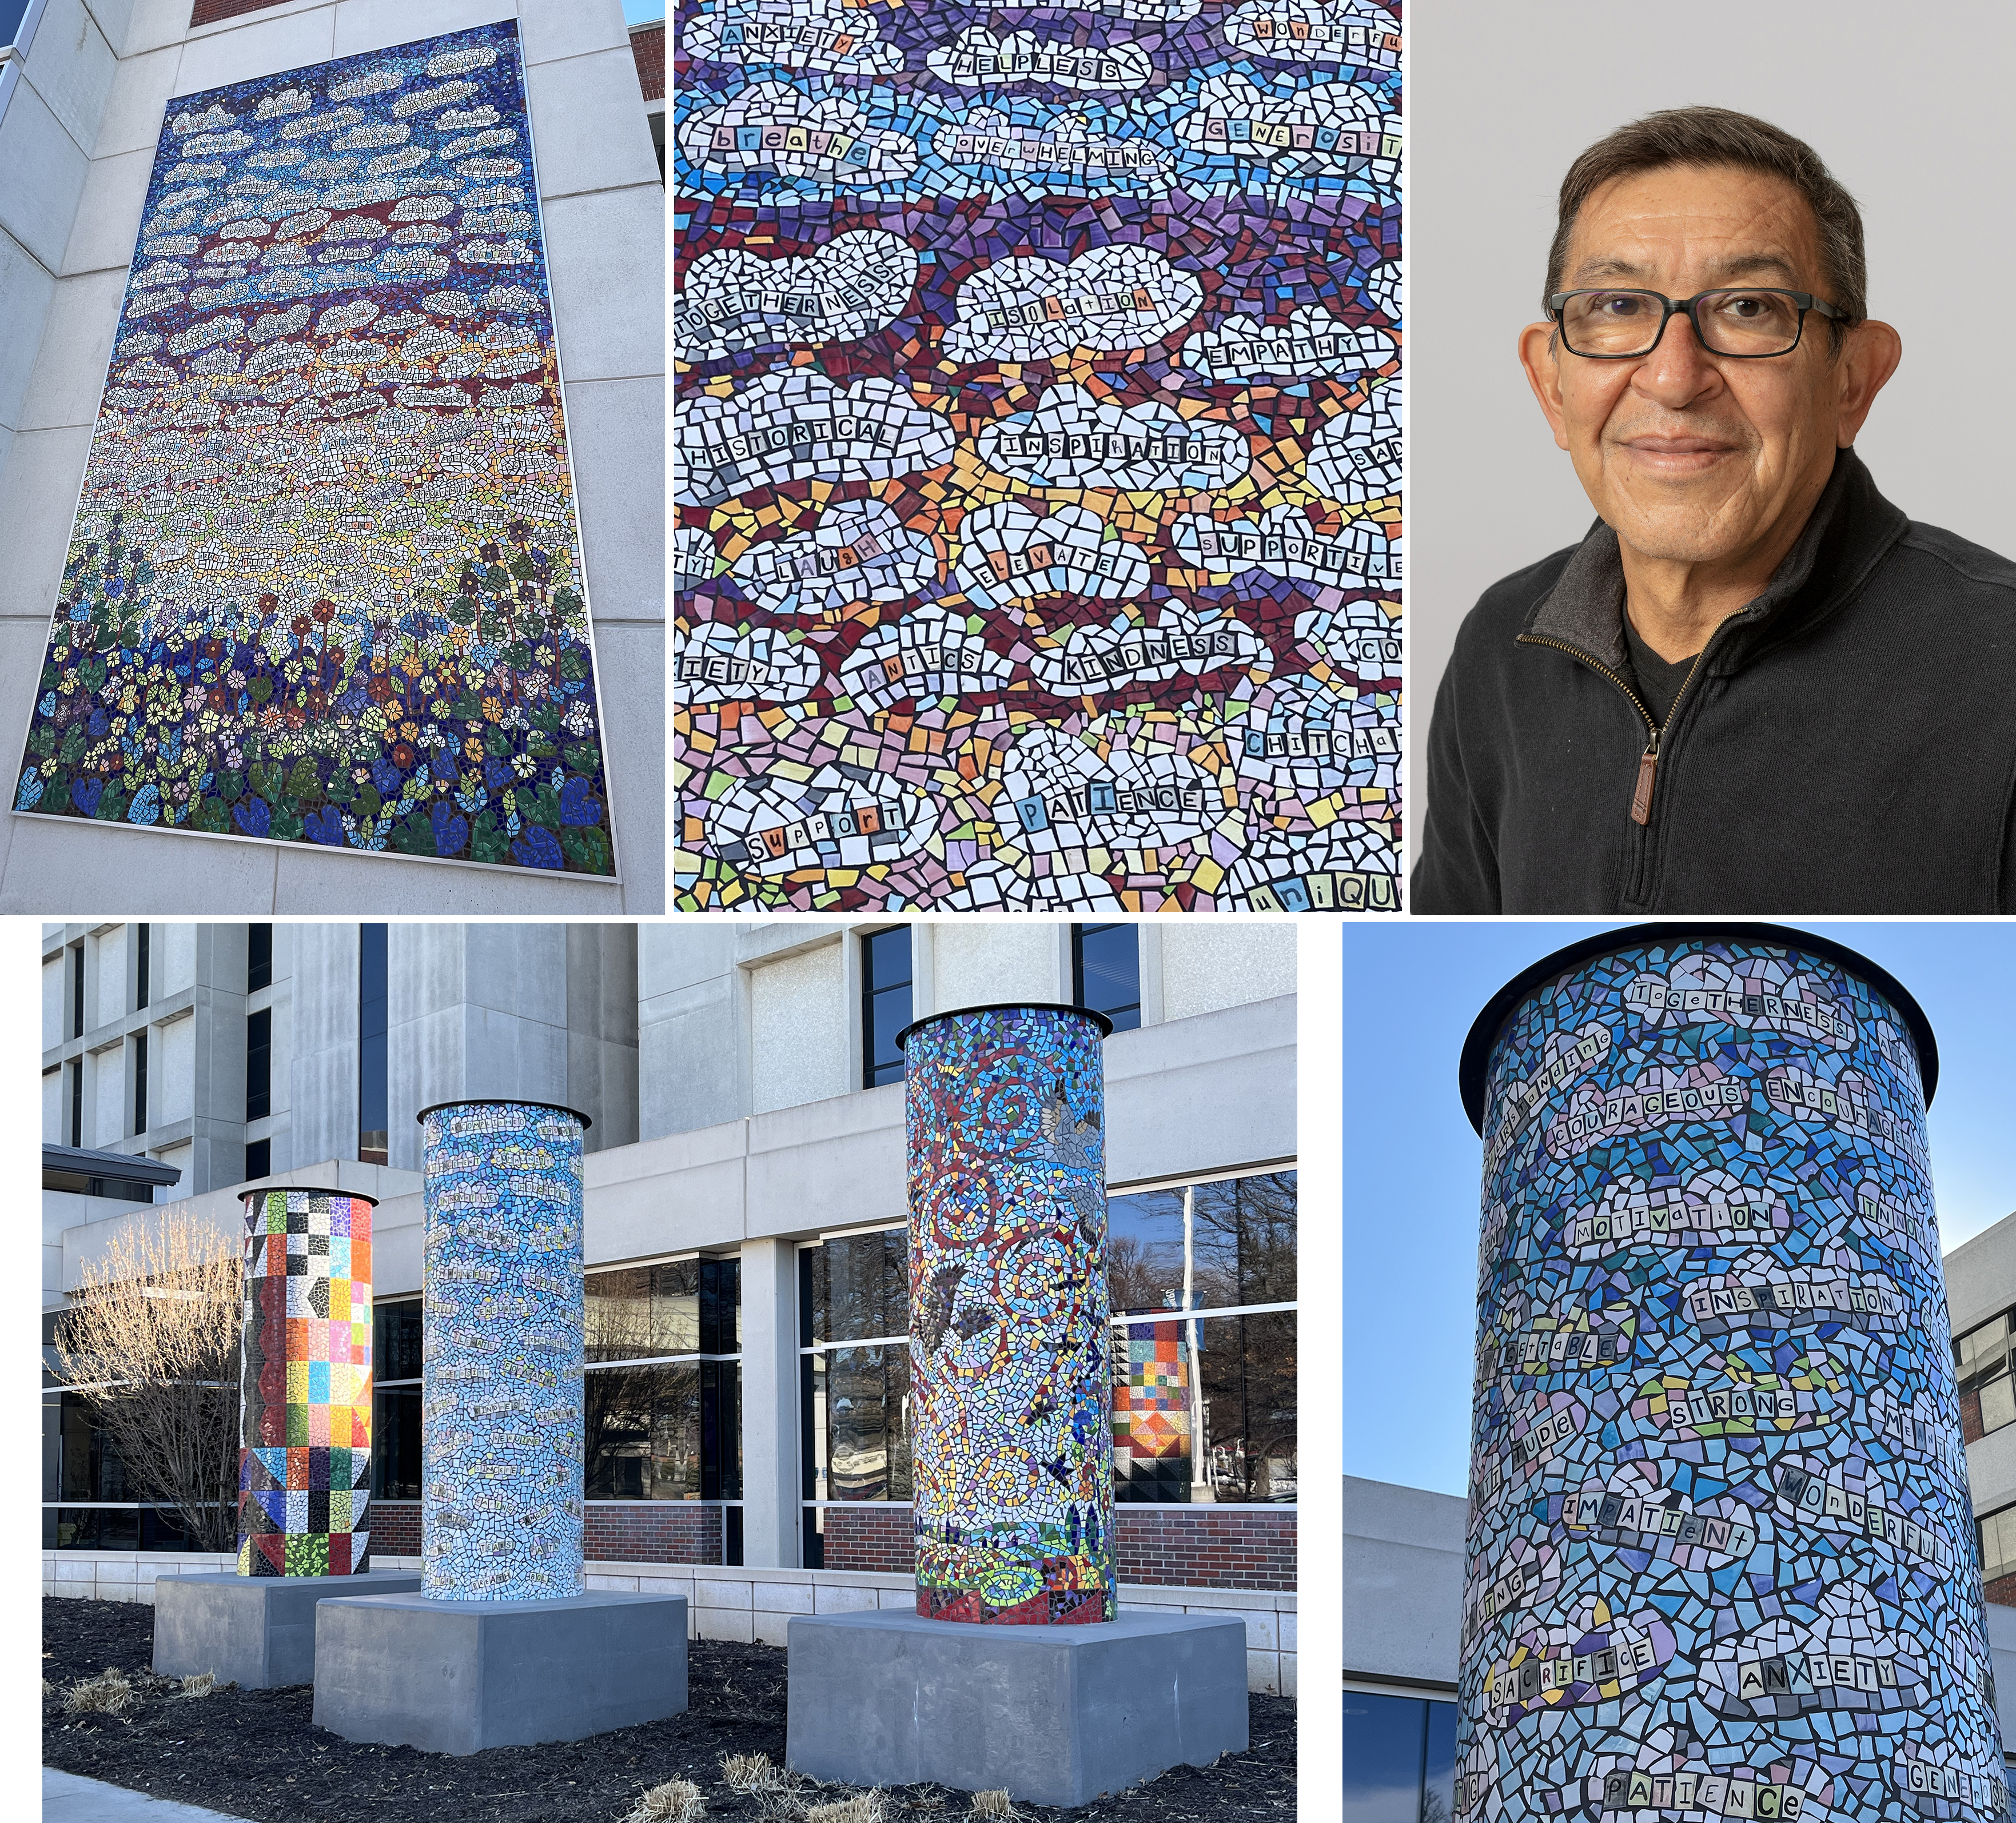 (Top) Eddie Dominguez’s 12’ x 22’ mosaic mural at Bryan East and (Bottom) Three tile pillars at the entrance to Bryan West with details of the words submitted by hospital staff to reflect on their experiences during the Covid-19 pandemic.